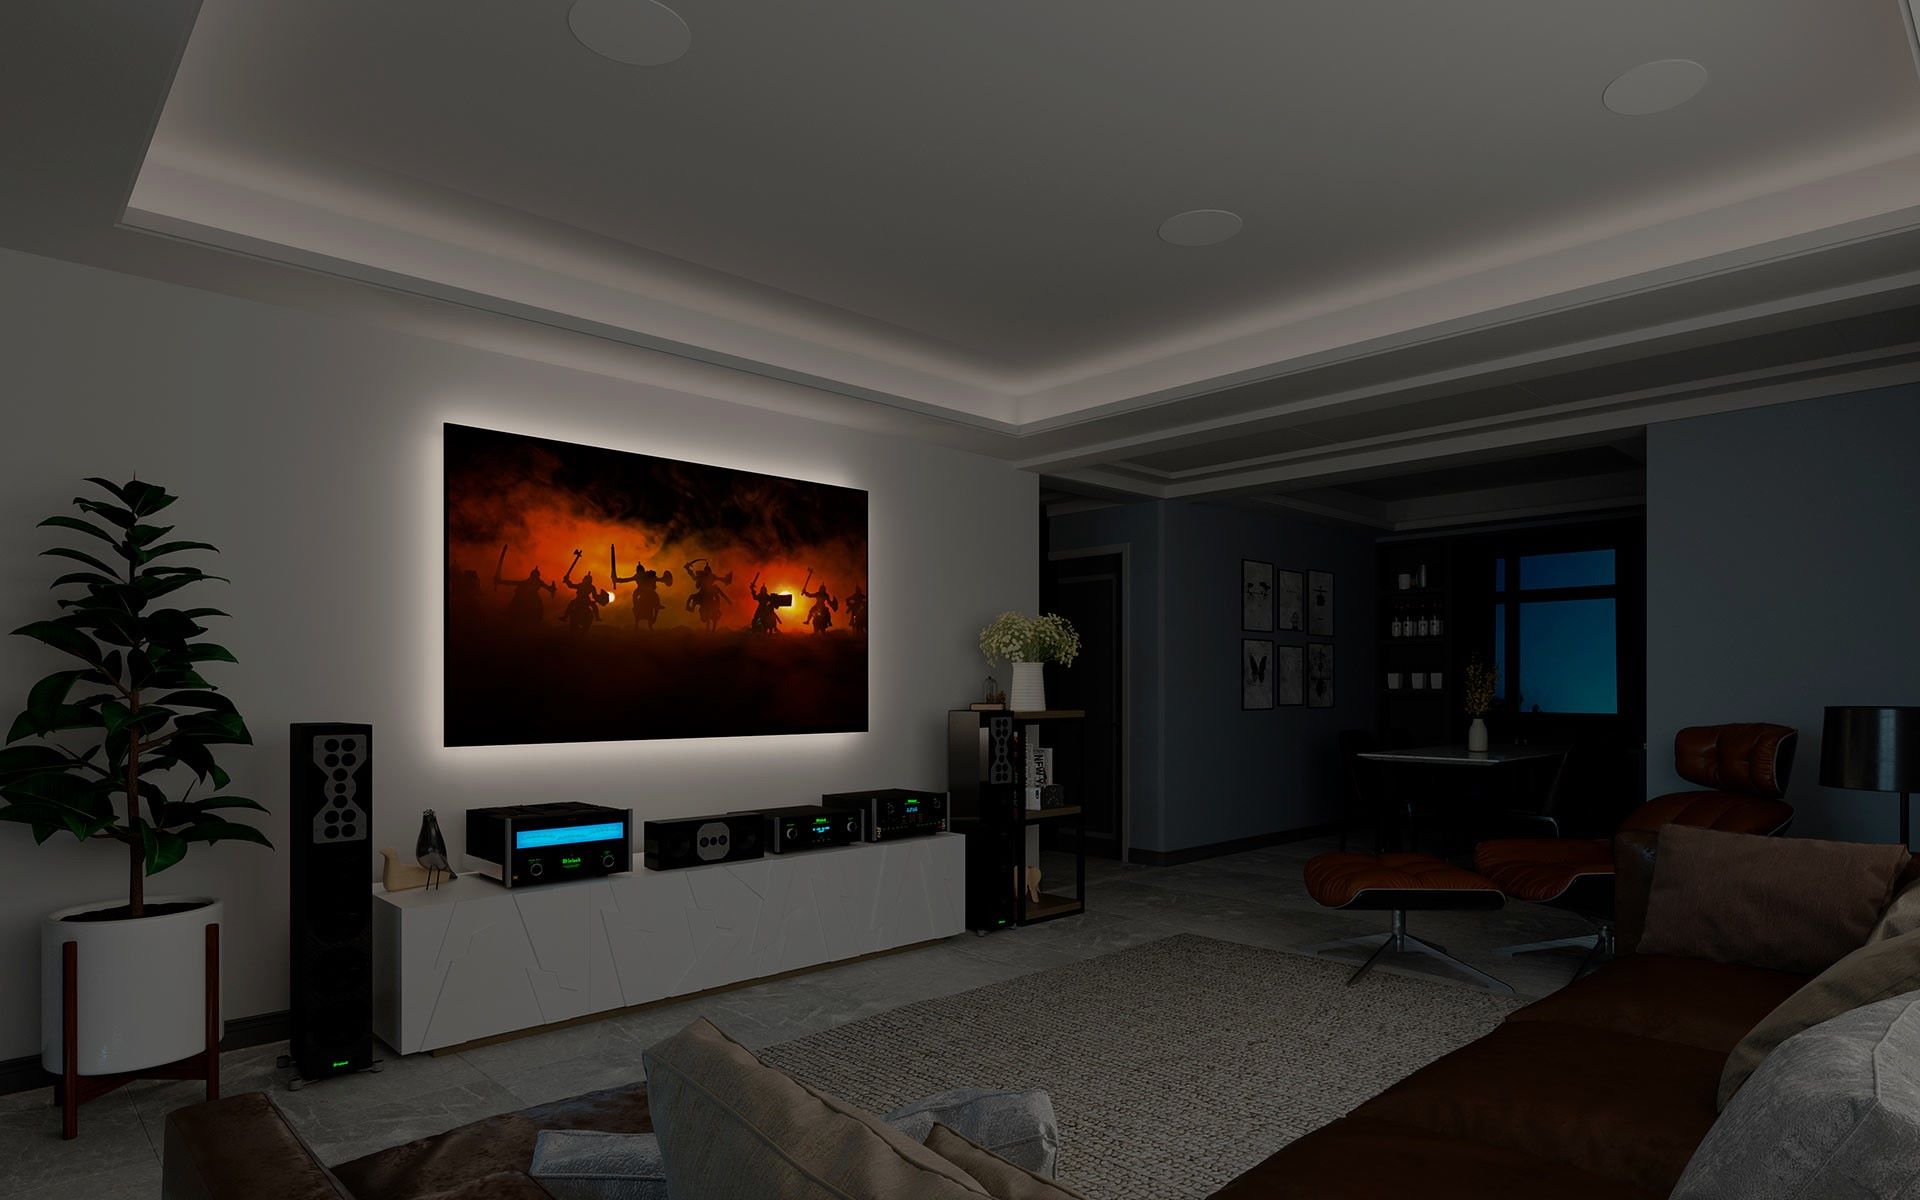 How To Design An A/V System For House